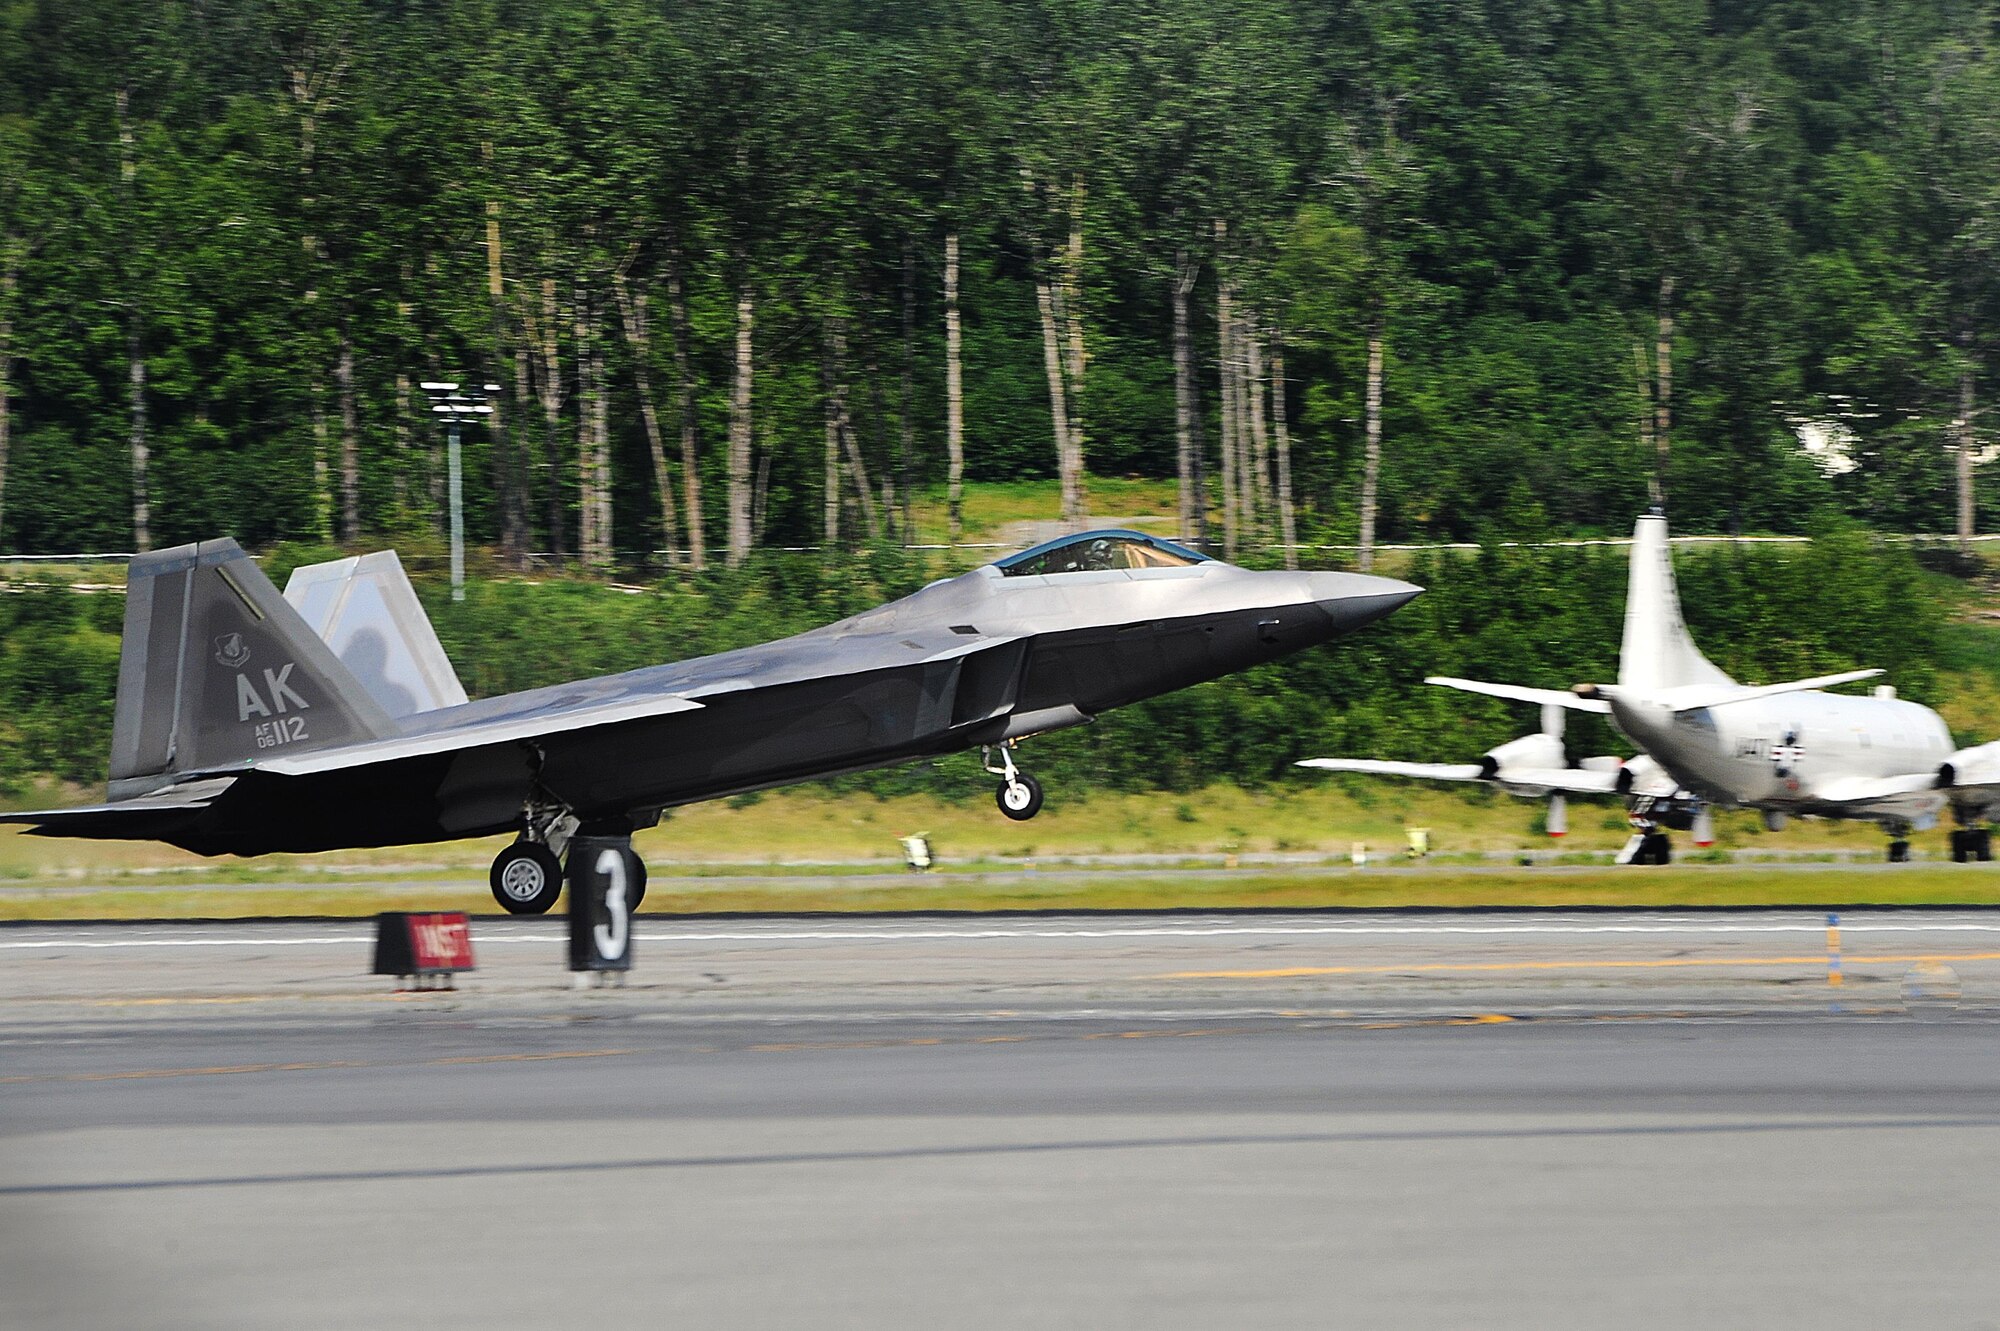 An F-22 Raptor from the 525 Fighter Squadron, returns from a mission during exercise Northern Edge 2015 at Joint Base Elmendorf-Richardson, Alaska, June 18, 2015. Northern Edge is Alaska’s premier joint training exercise designed to practice operations, techniques and procedures, as well as enhance interoperability among the services. Thousands of participants from all services and components were involved. (U.S. Air Force photo/Staff Sgt. William Banton)